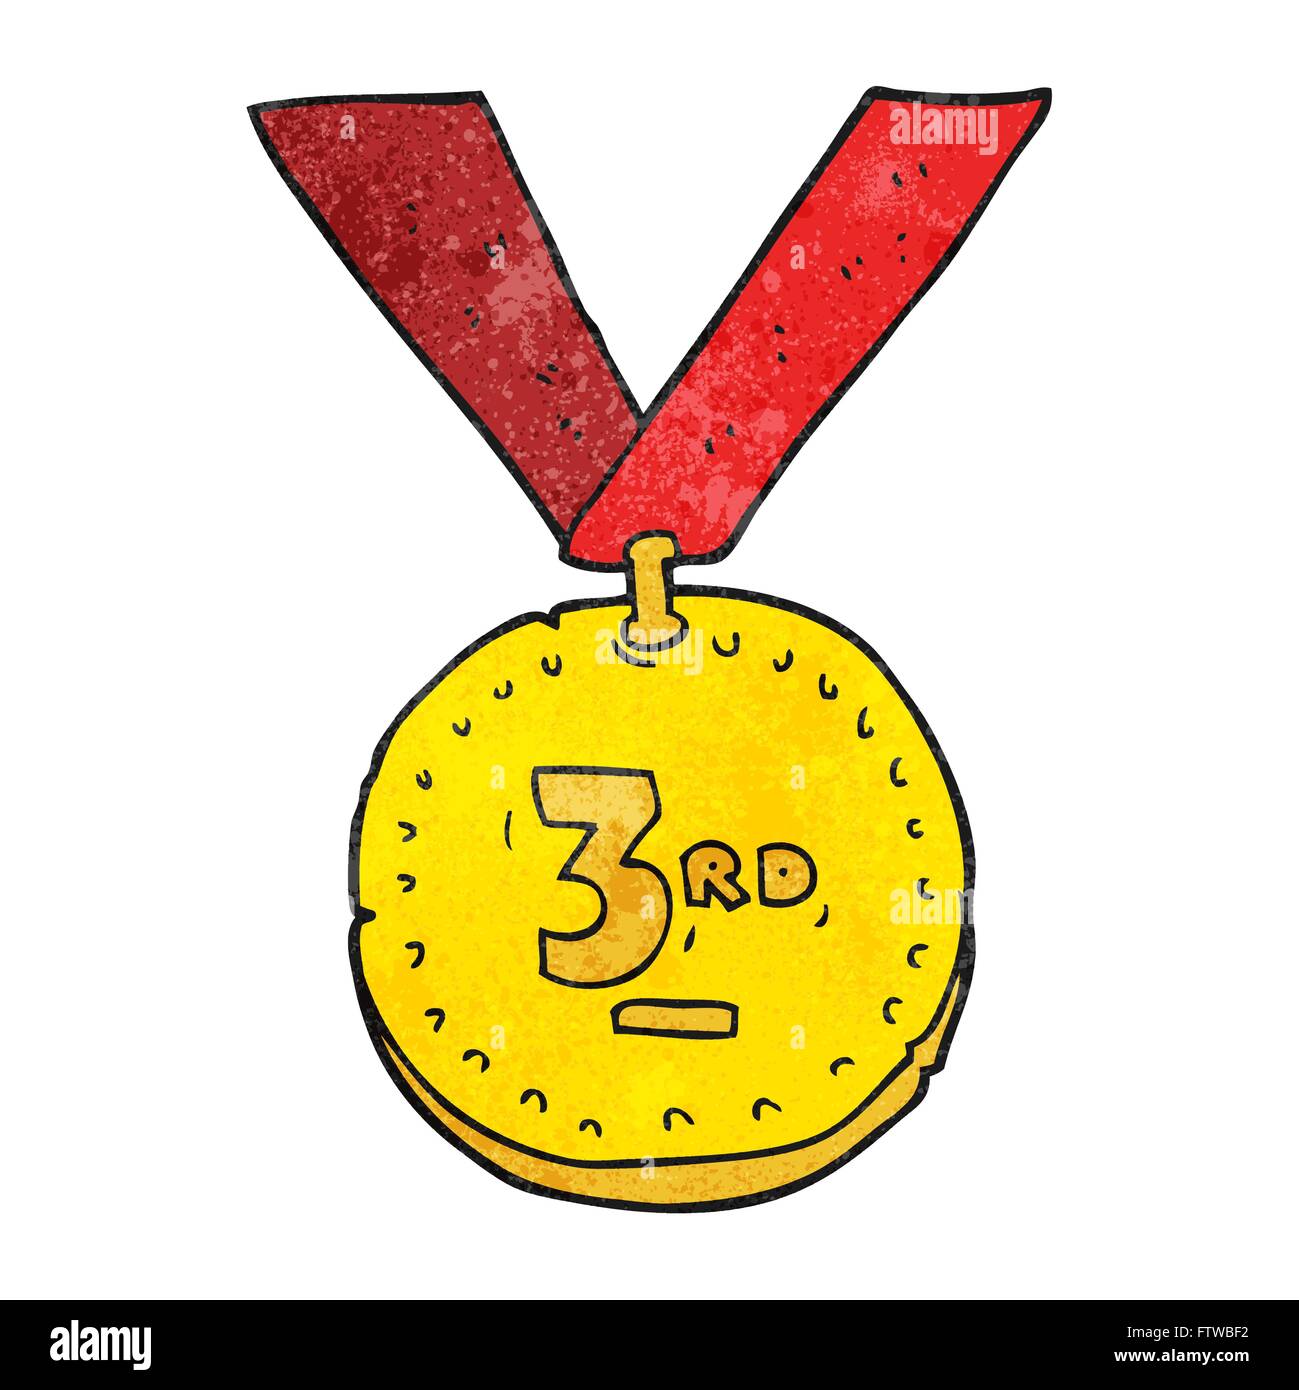 freehand textured cartoon sports medal Stock Vector